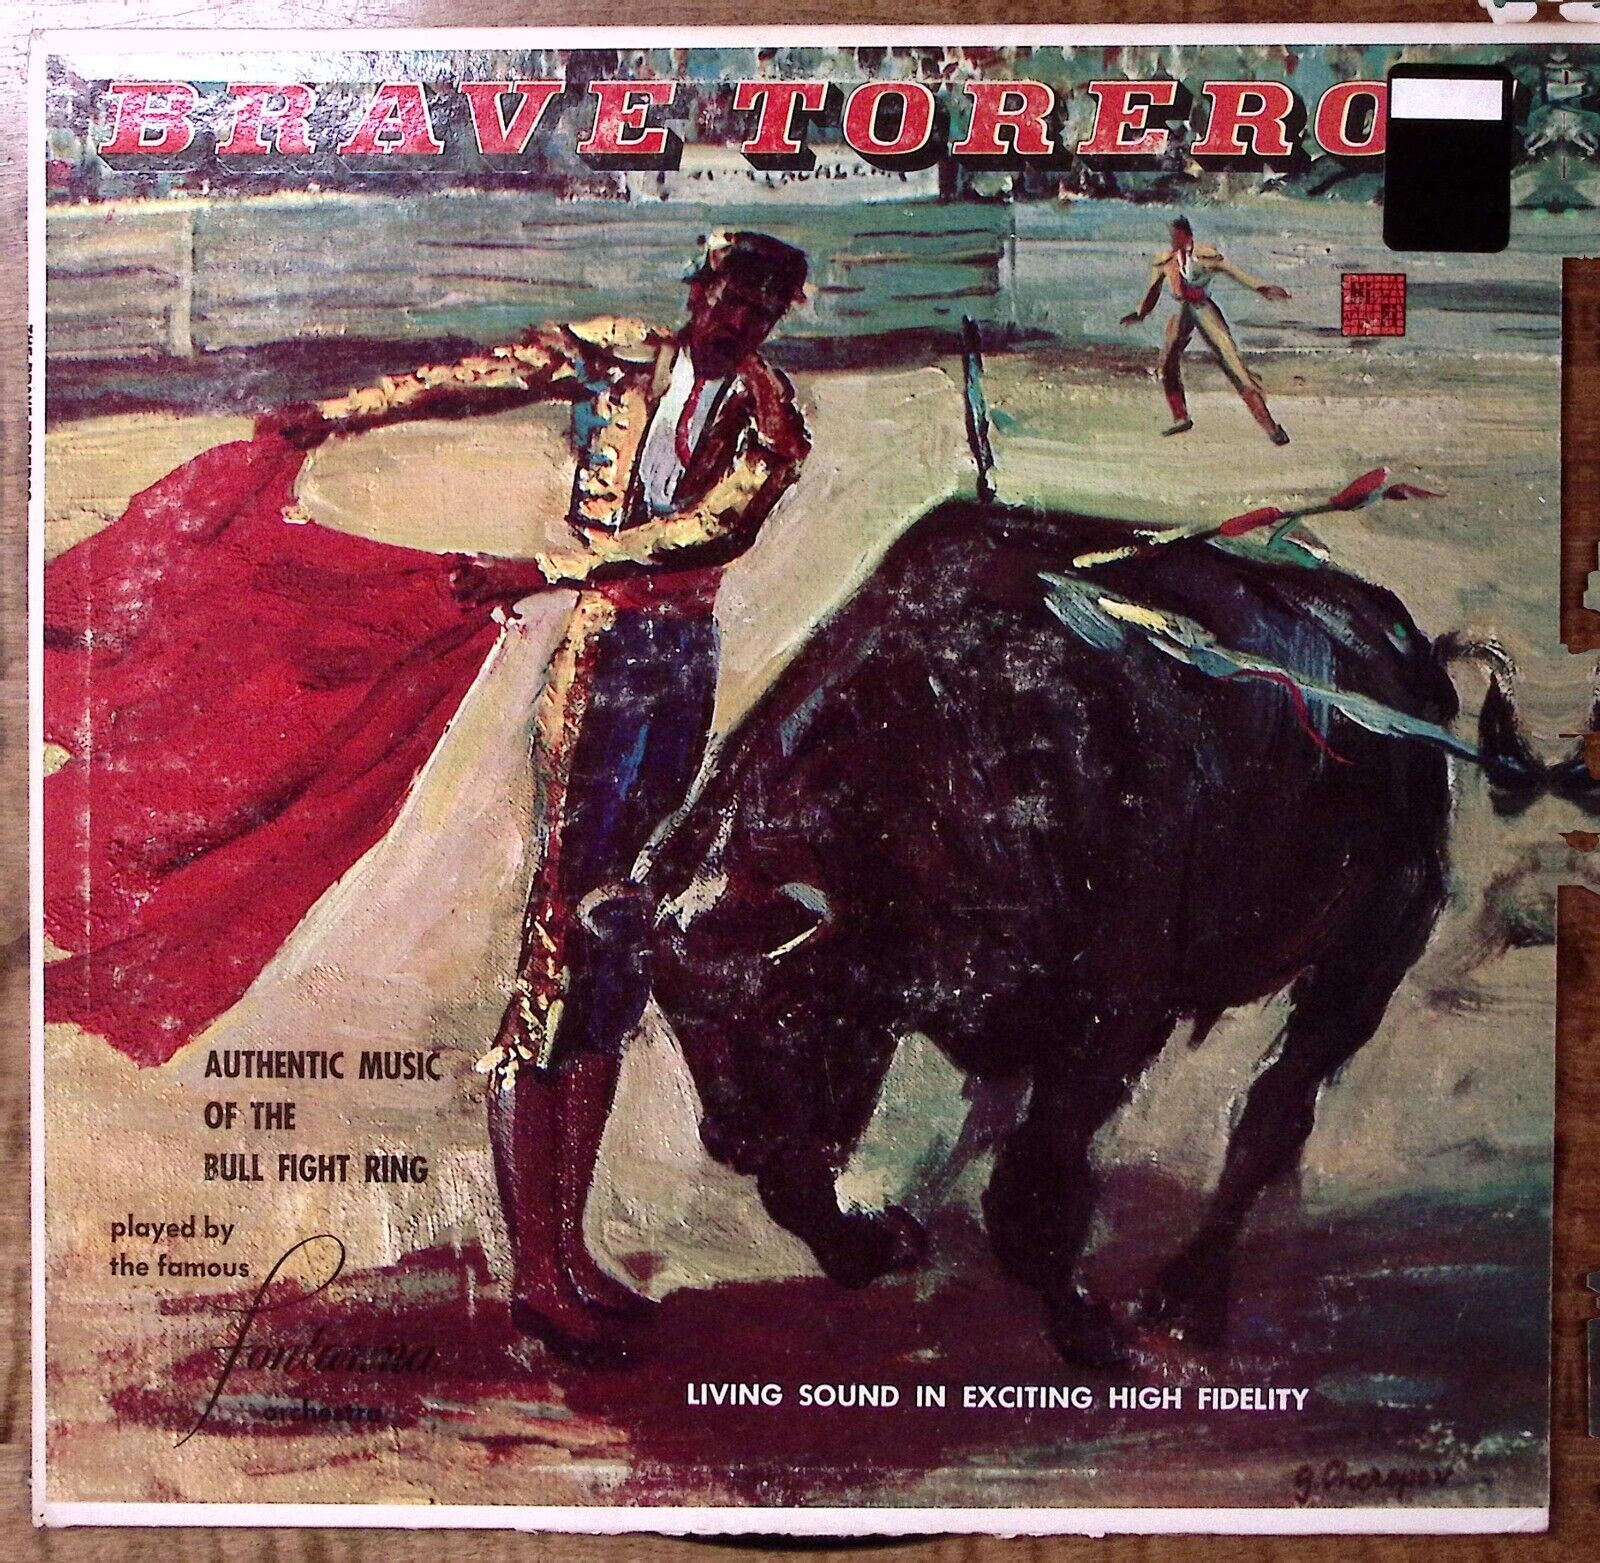 FONTANNA AND HIS ORCHESTRA  THE BRAVE TOREROS MASTERSEAL RECORDS VINYL LP 191-23